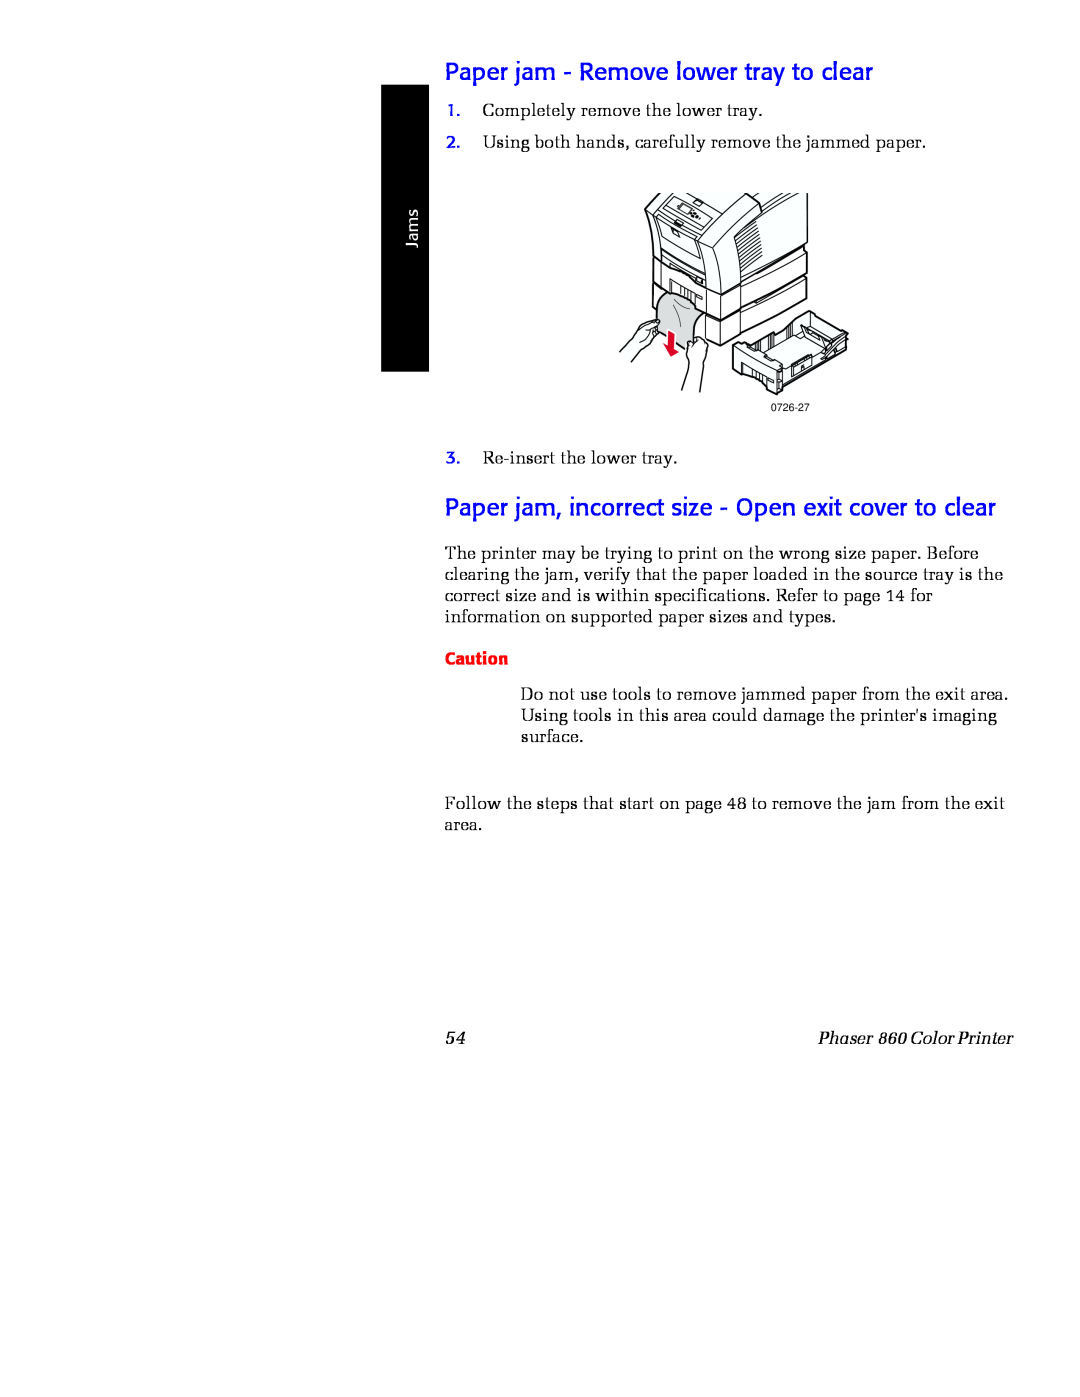 Xerox Phaser 860 manual Paper jam - Remove lower tray to clear, Paper jam, incorrect size - Open exit cover to clear, Jams 